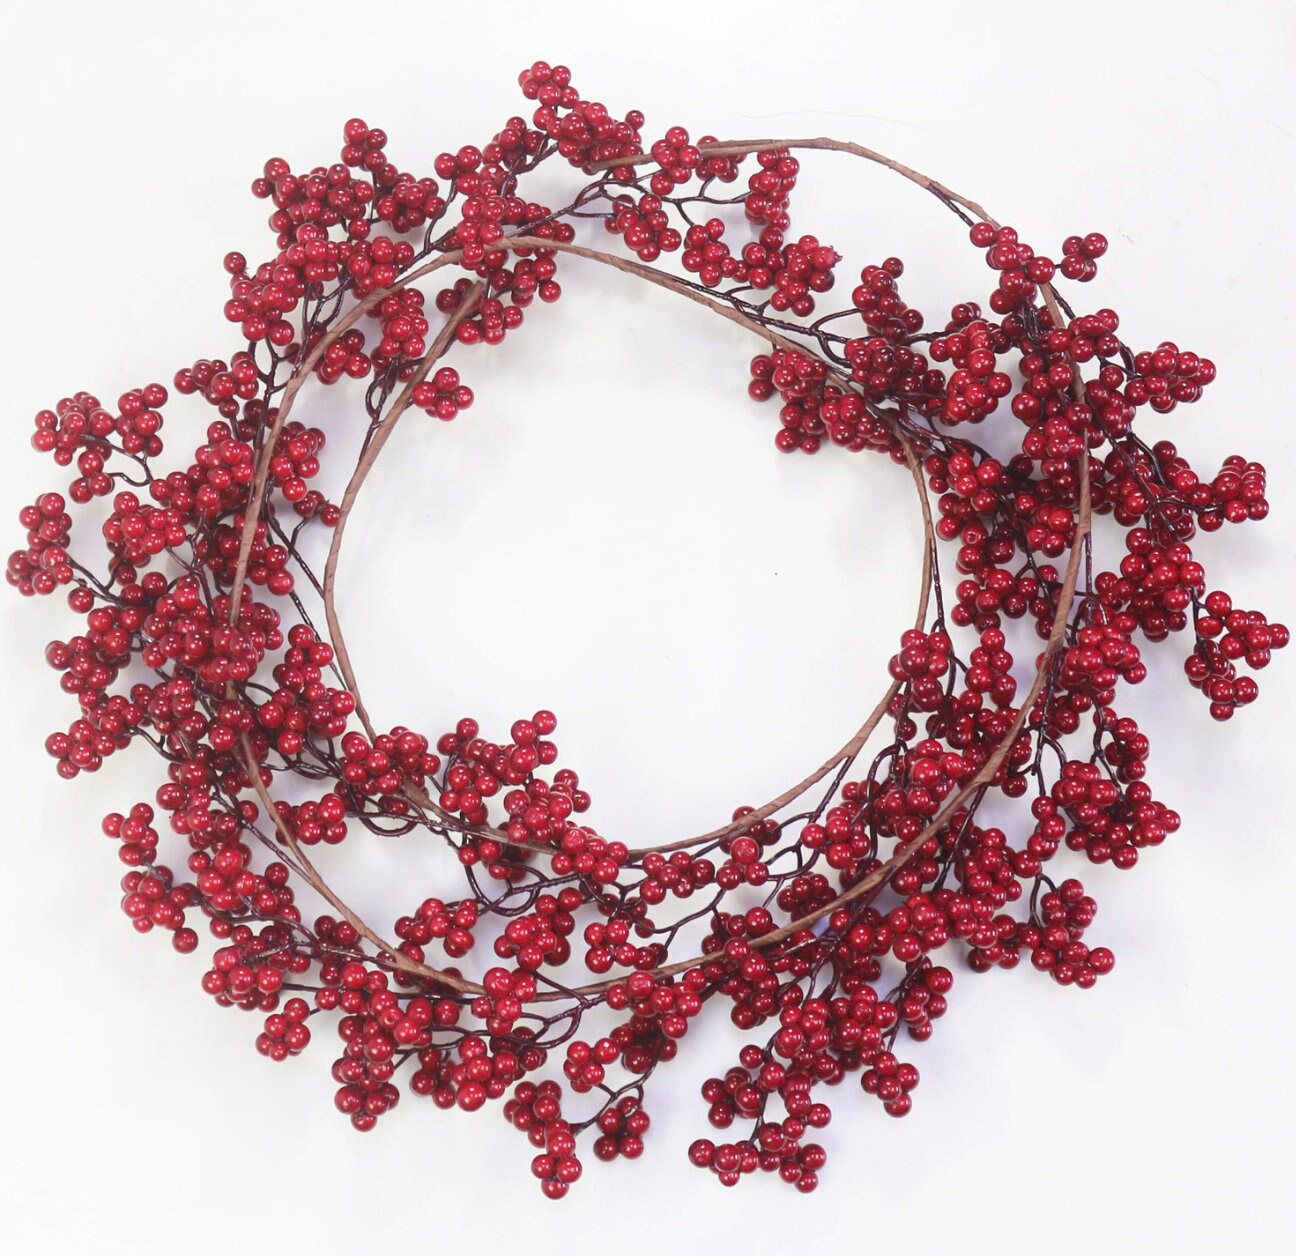 5.9 FT. Faux Red Berry Christmas Garland FREE LED Lights Holiday Garland Tree Decorations Primitive Old Decor Mantle Fireplace Decorations